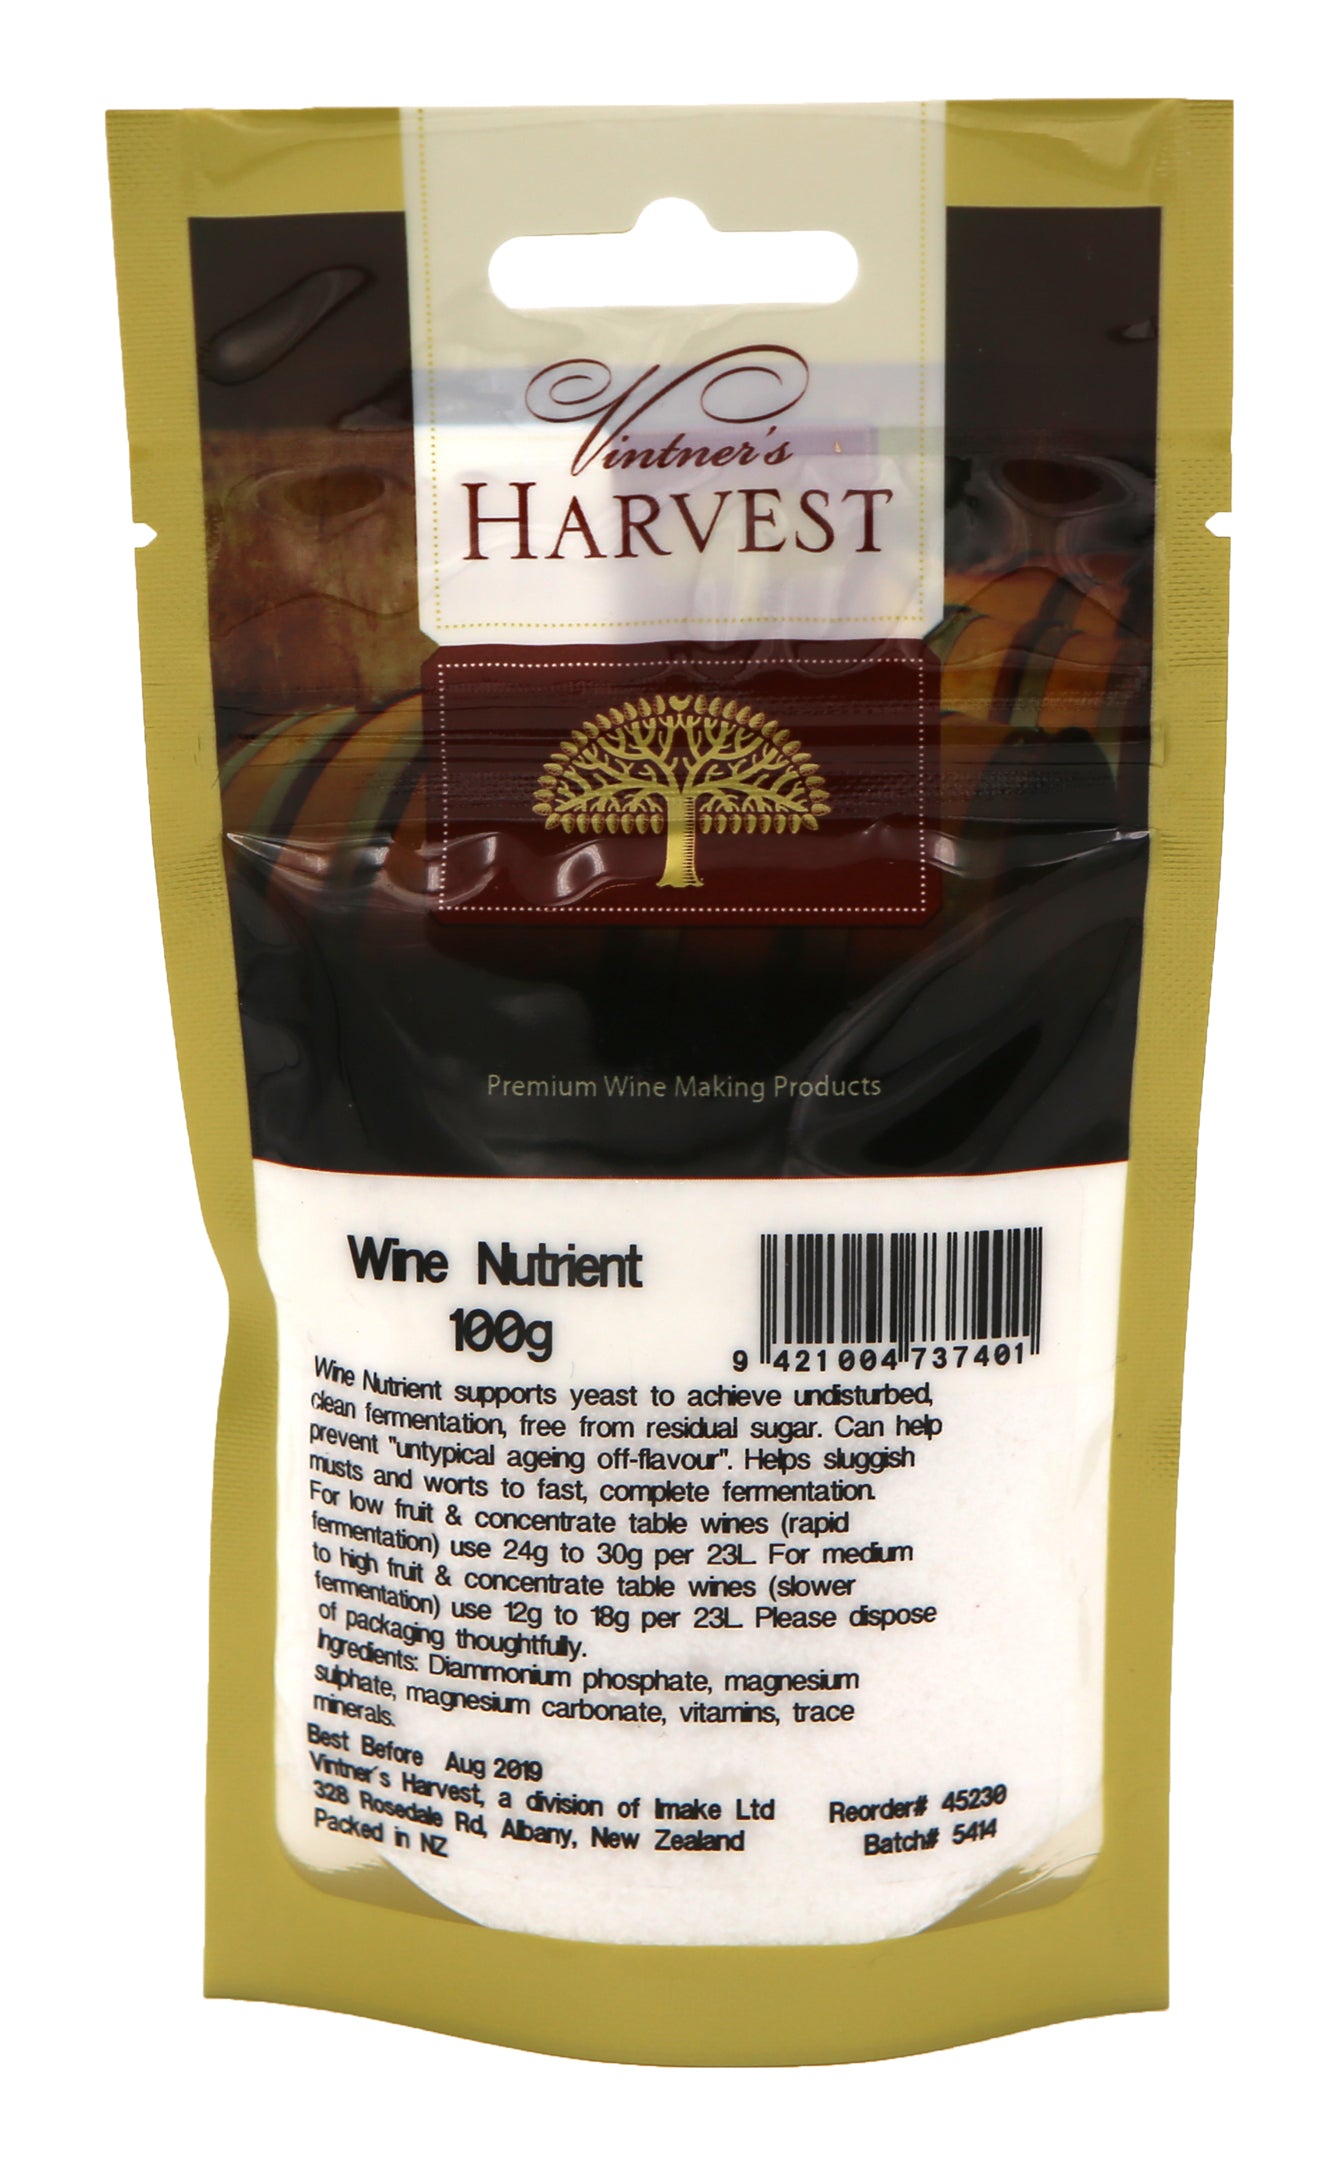 Vintner's Harvest Wine Nutrient 100g - All Things Fermented | Home Brew Shop NZ | Supplies | Equipment